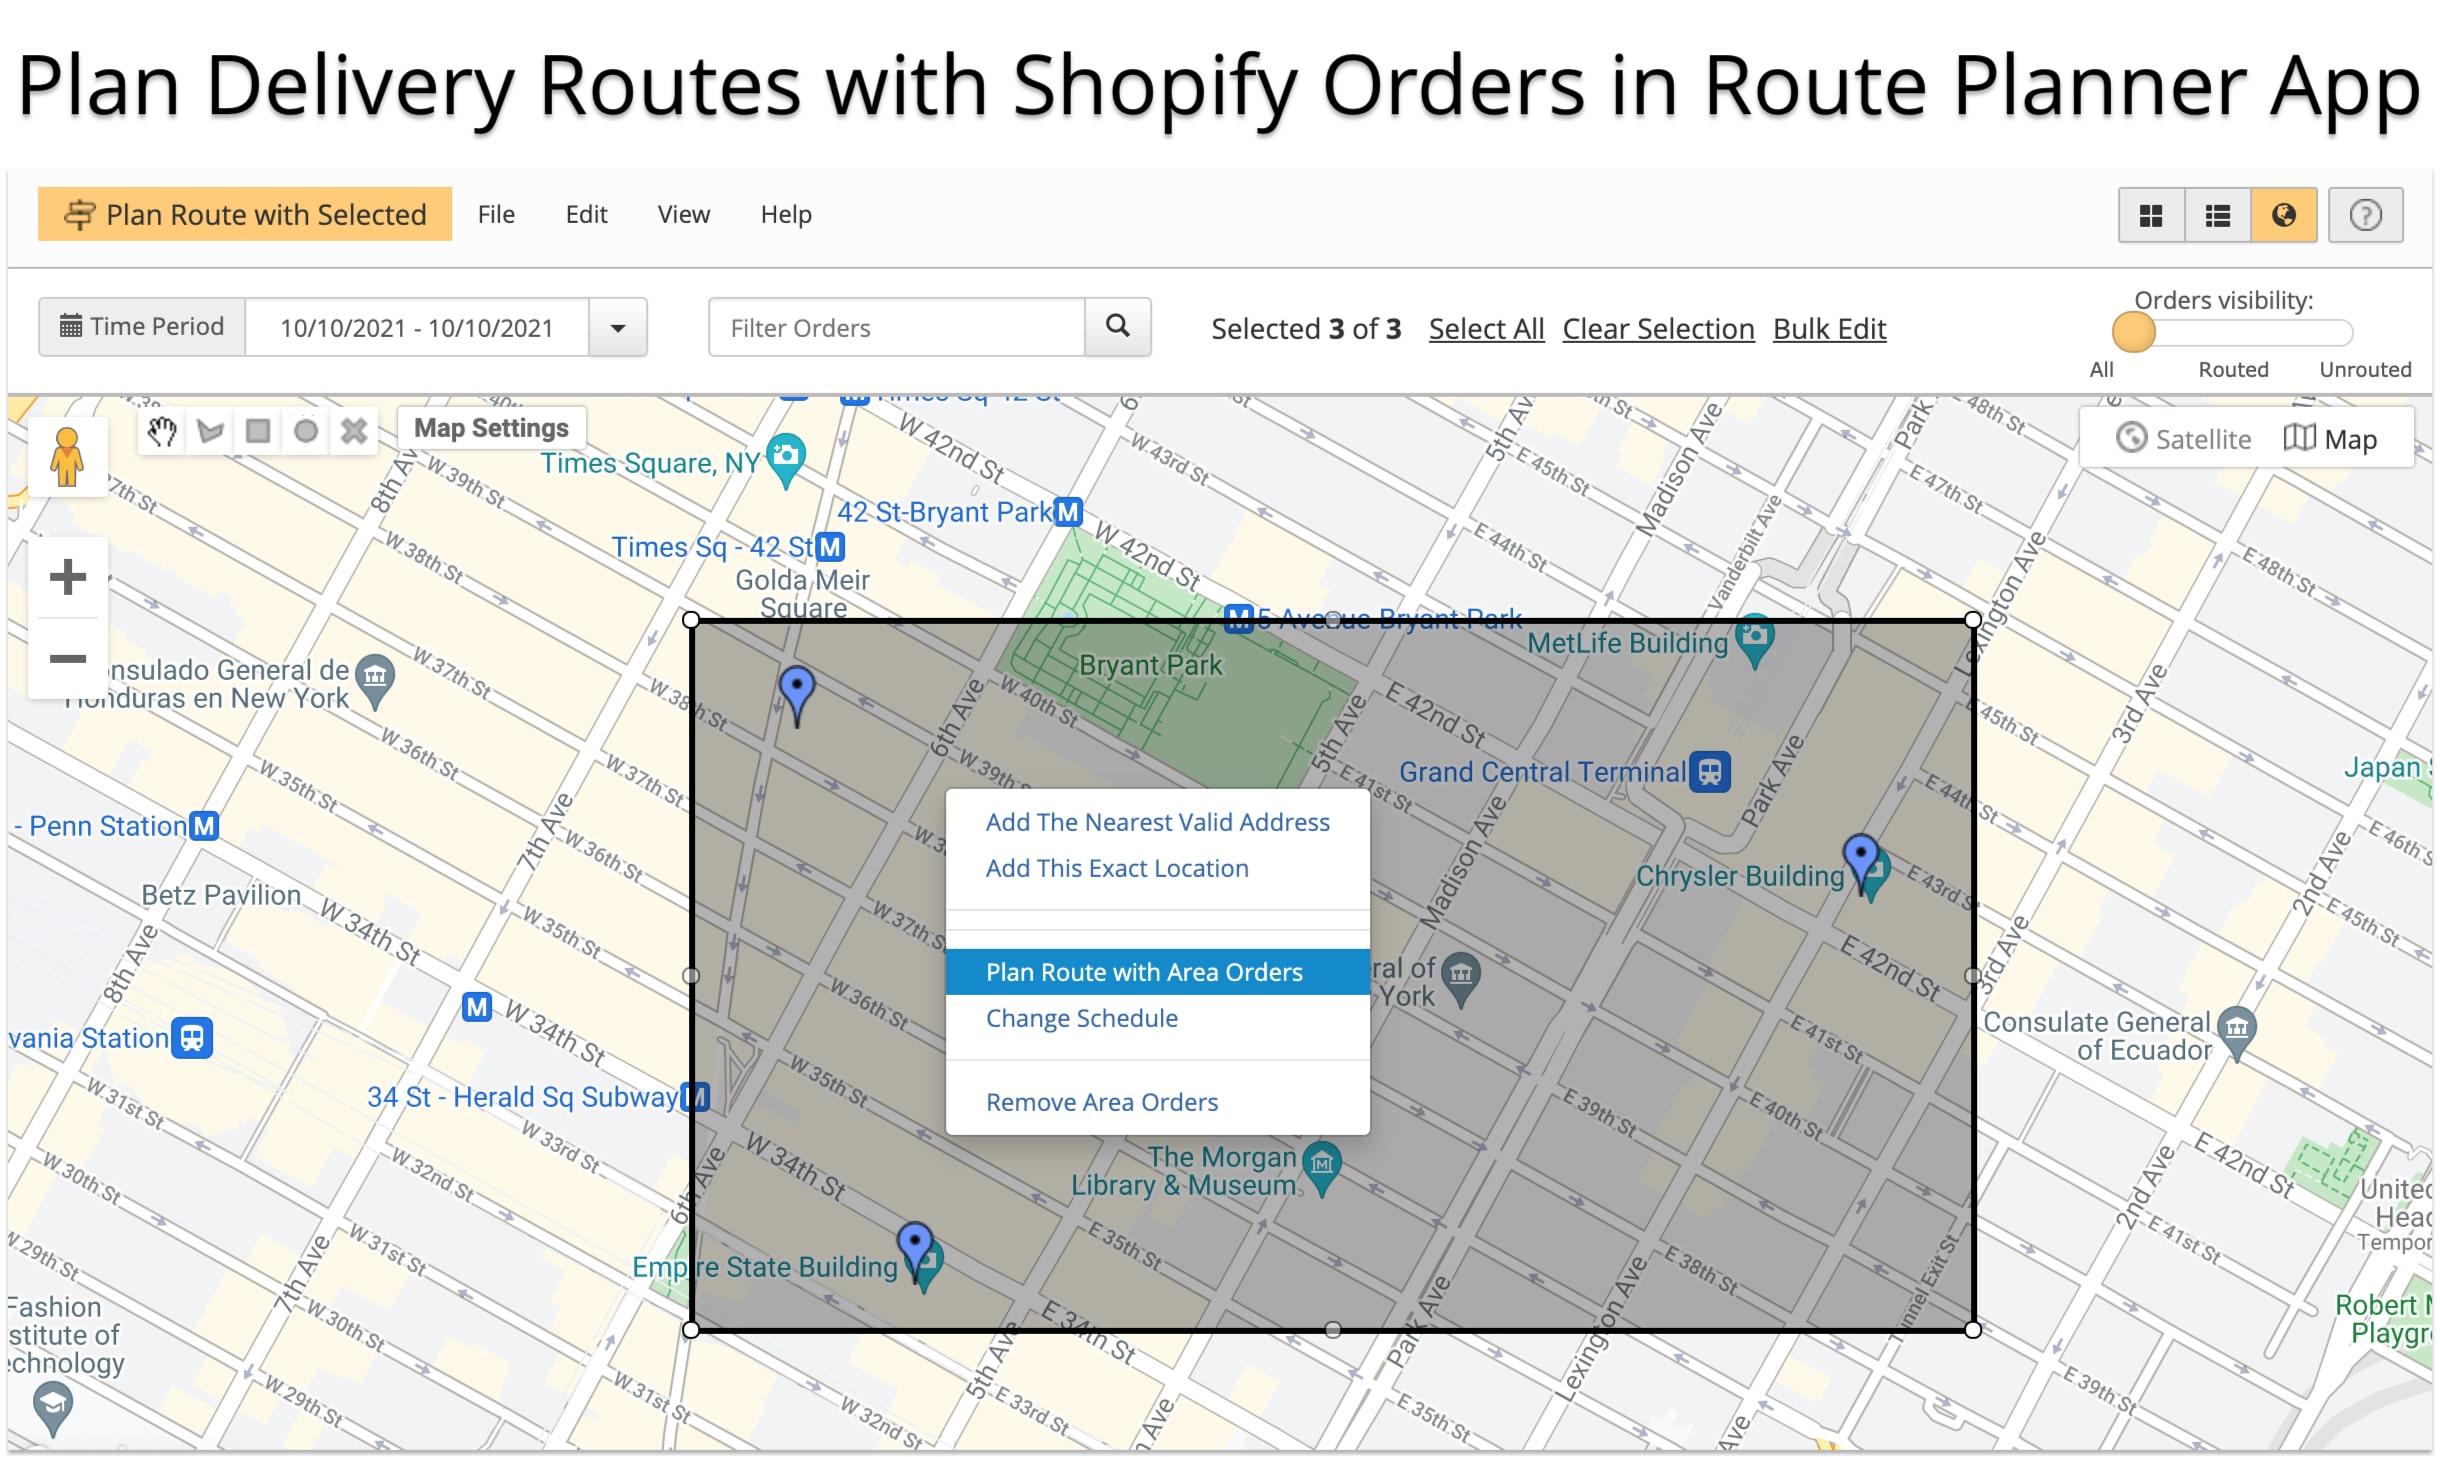 Use route planner map to optimize delivery routes with scheduled Shopify orders.